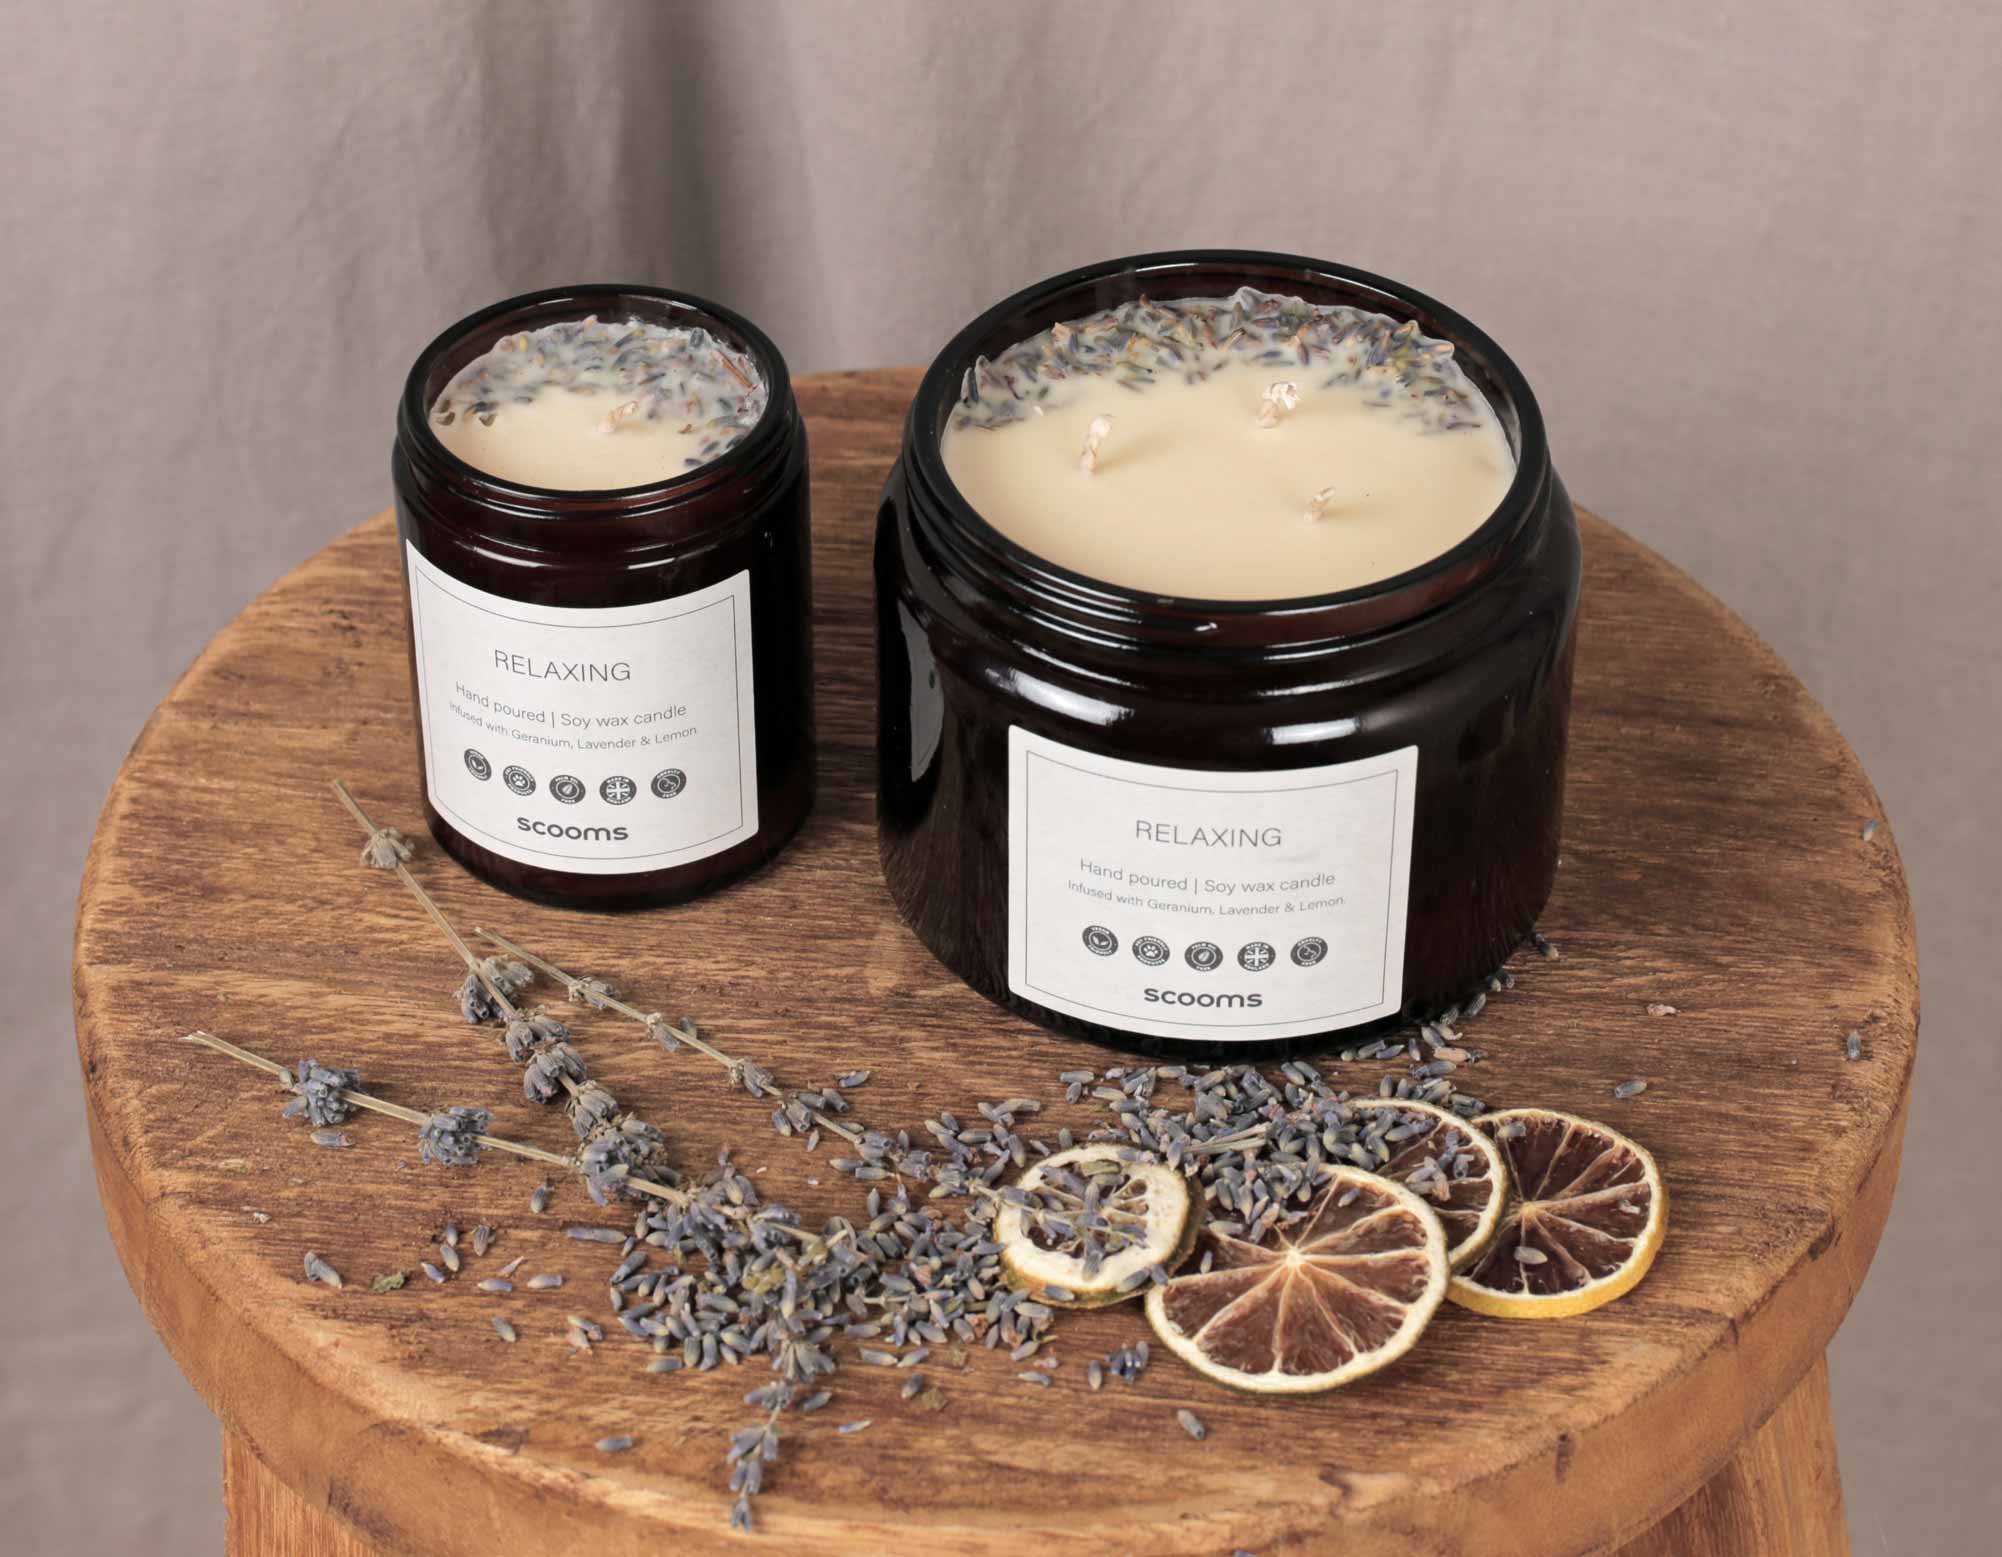 Relaxing naturally scented candle infused with Geranium, Lavender & Lemon